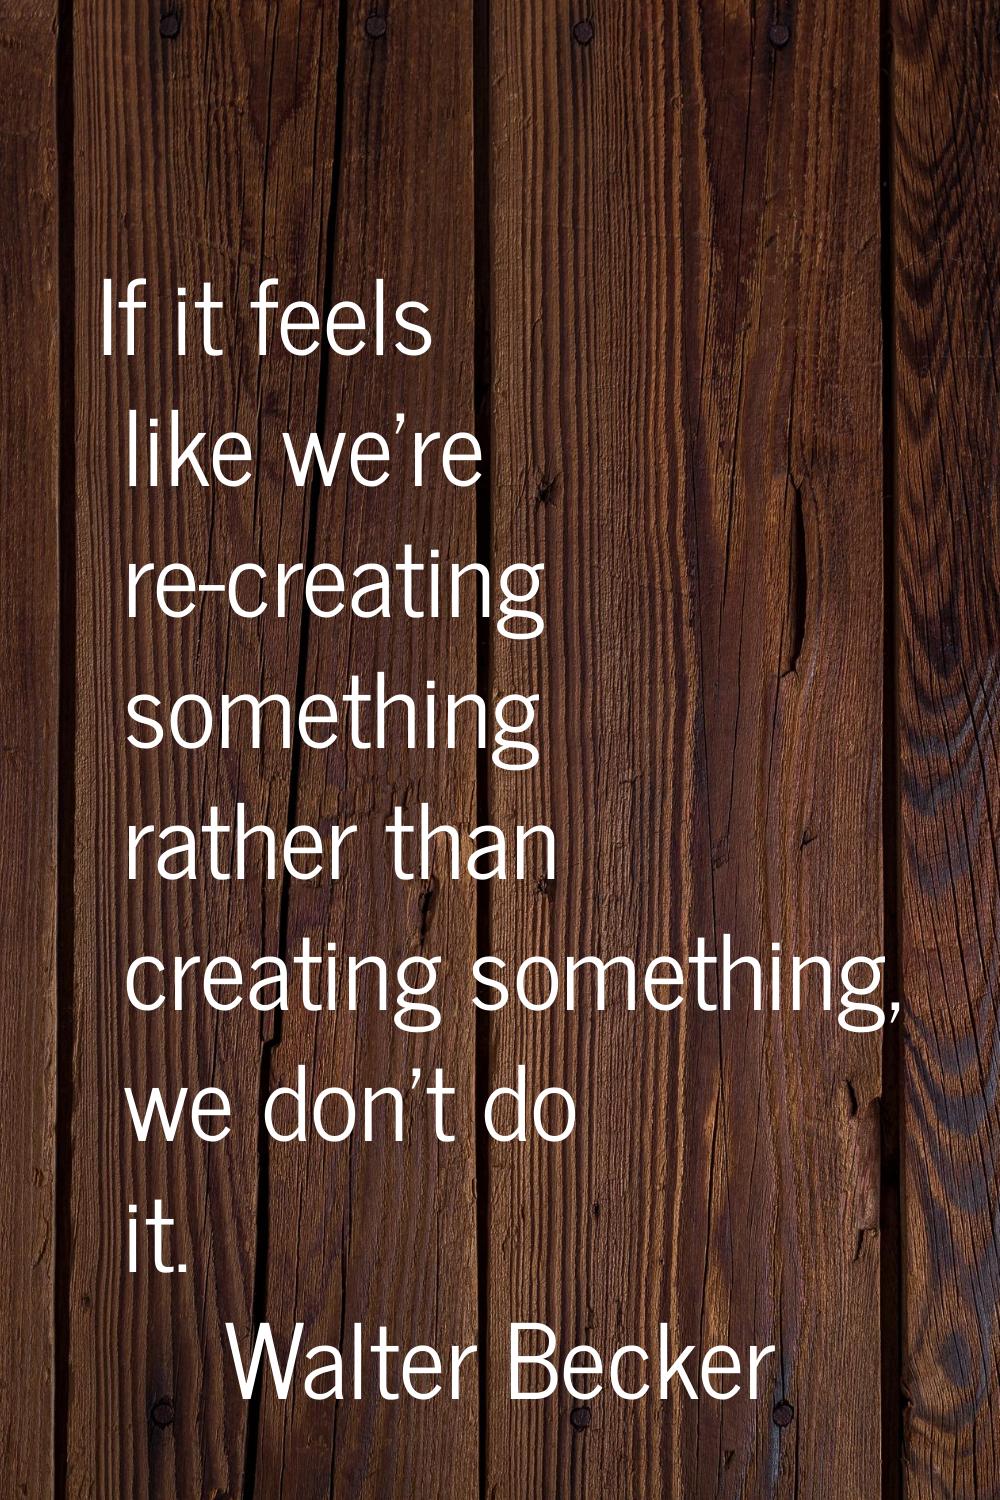 If it feels like we're re-creating something rather than creating something, we don't do it.